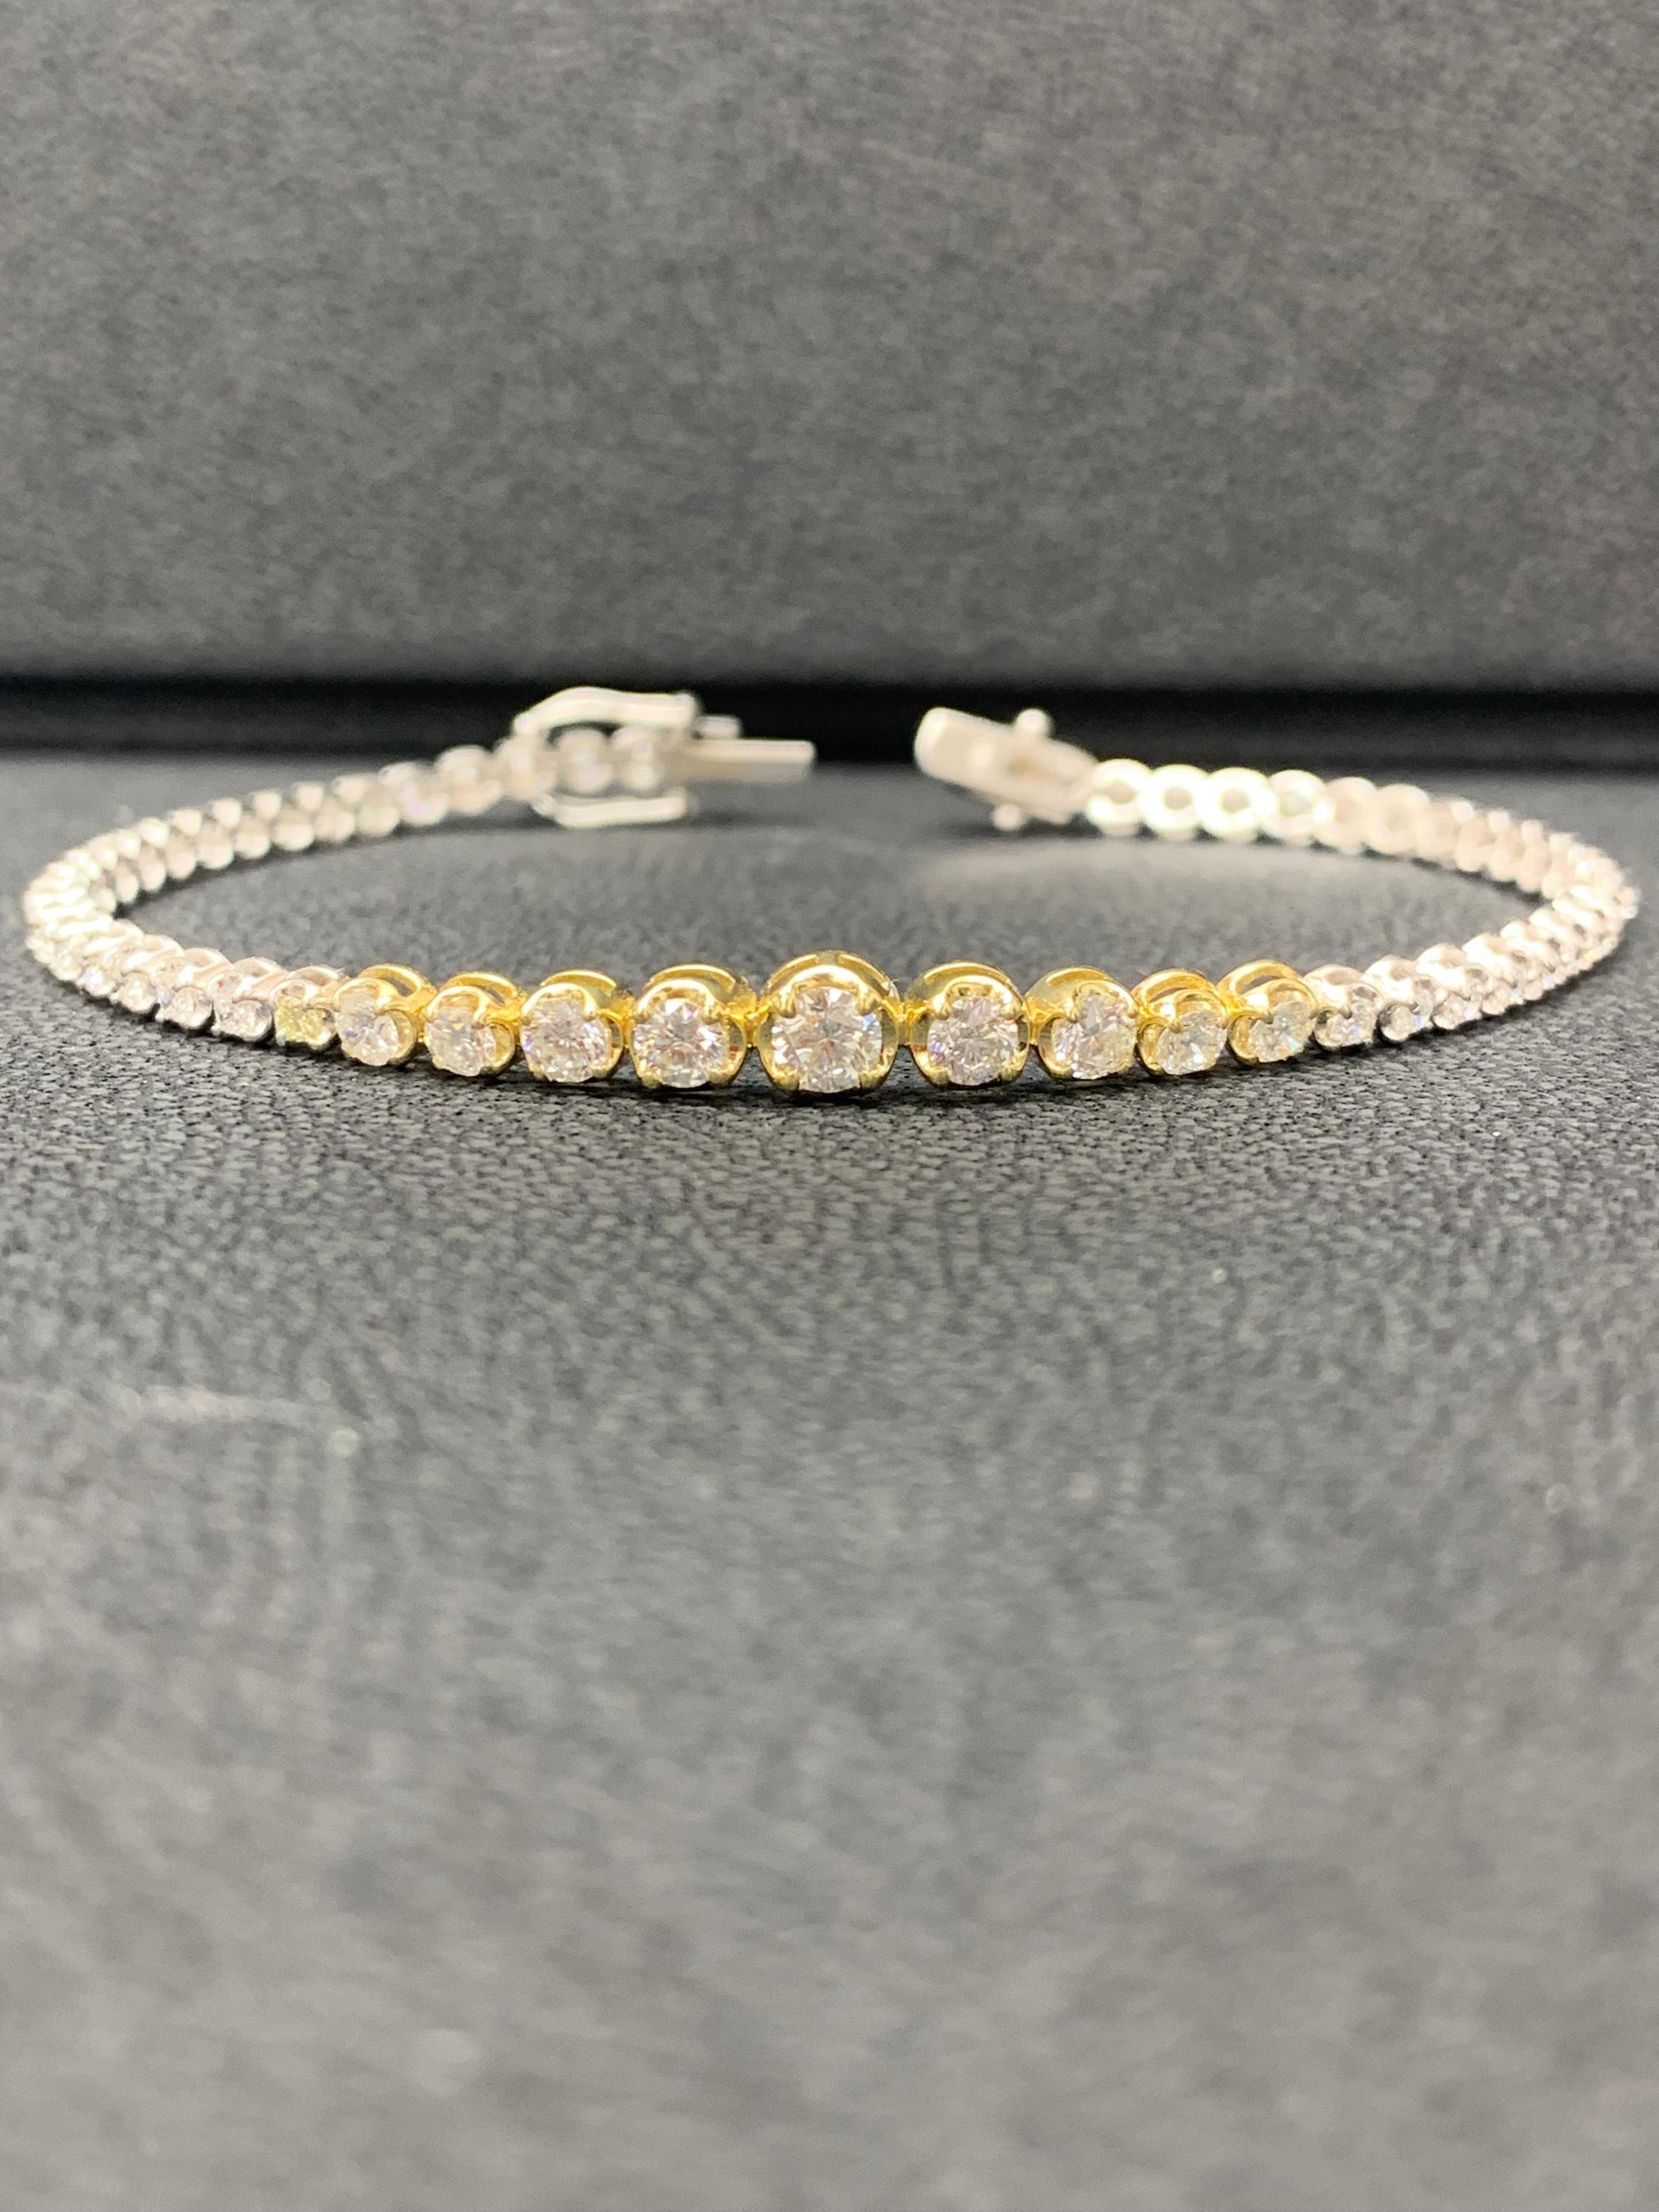 Women's Grandeur 2.25 Carat Round Cut Diamond Tennis Bracelet in Yellow and White Gold For Sale